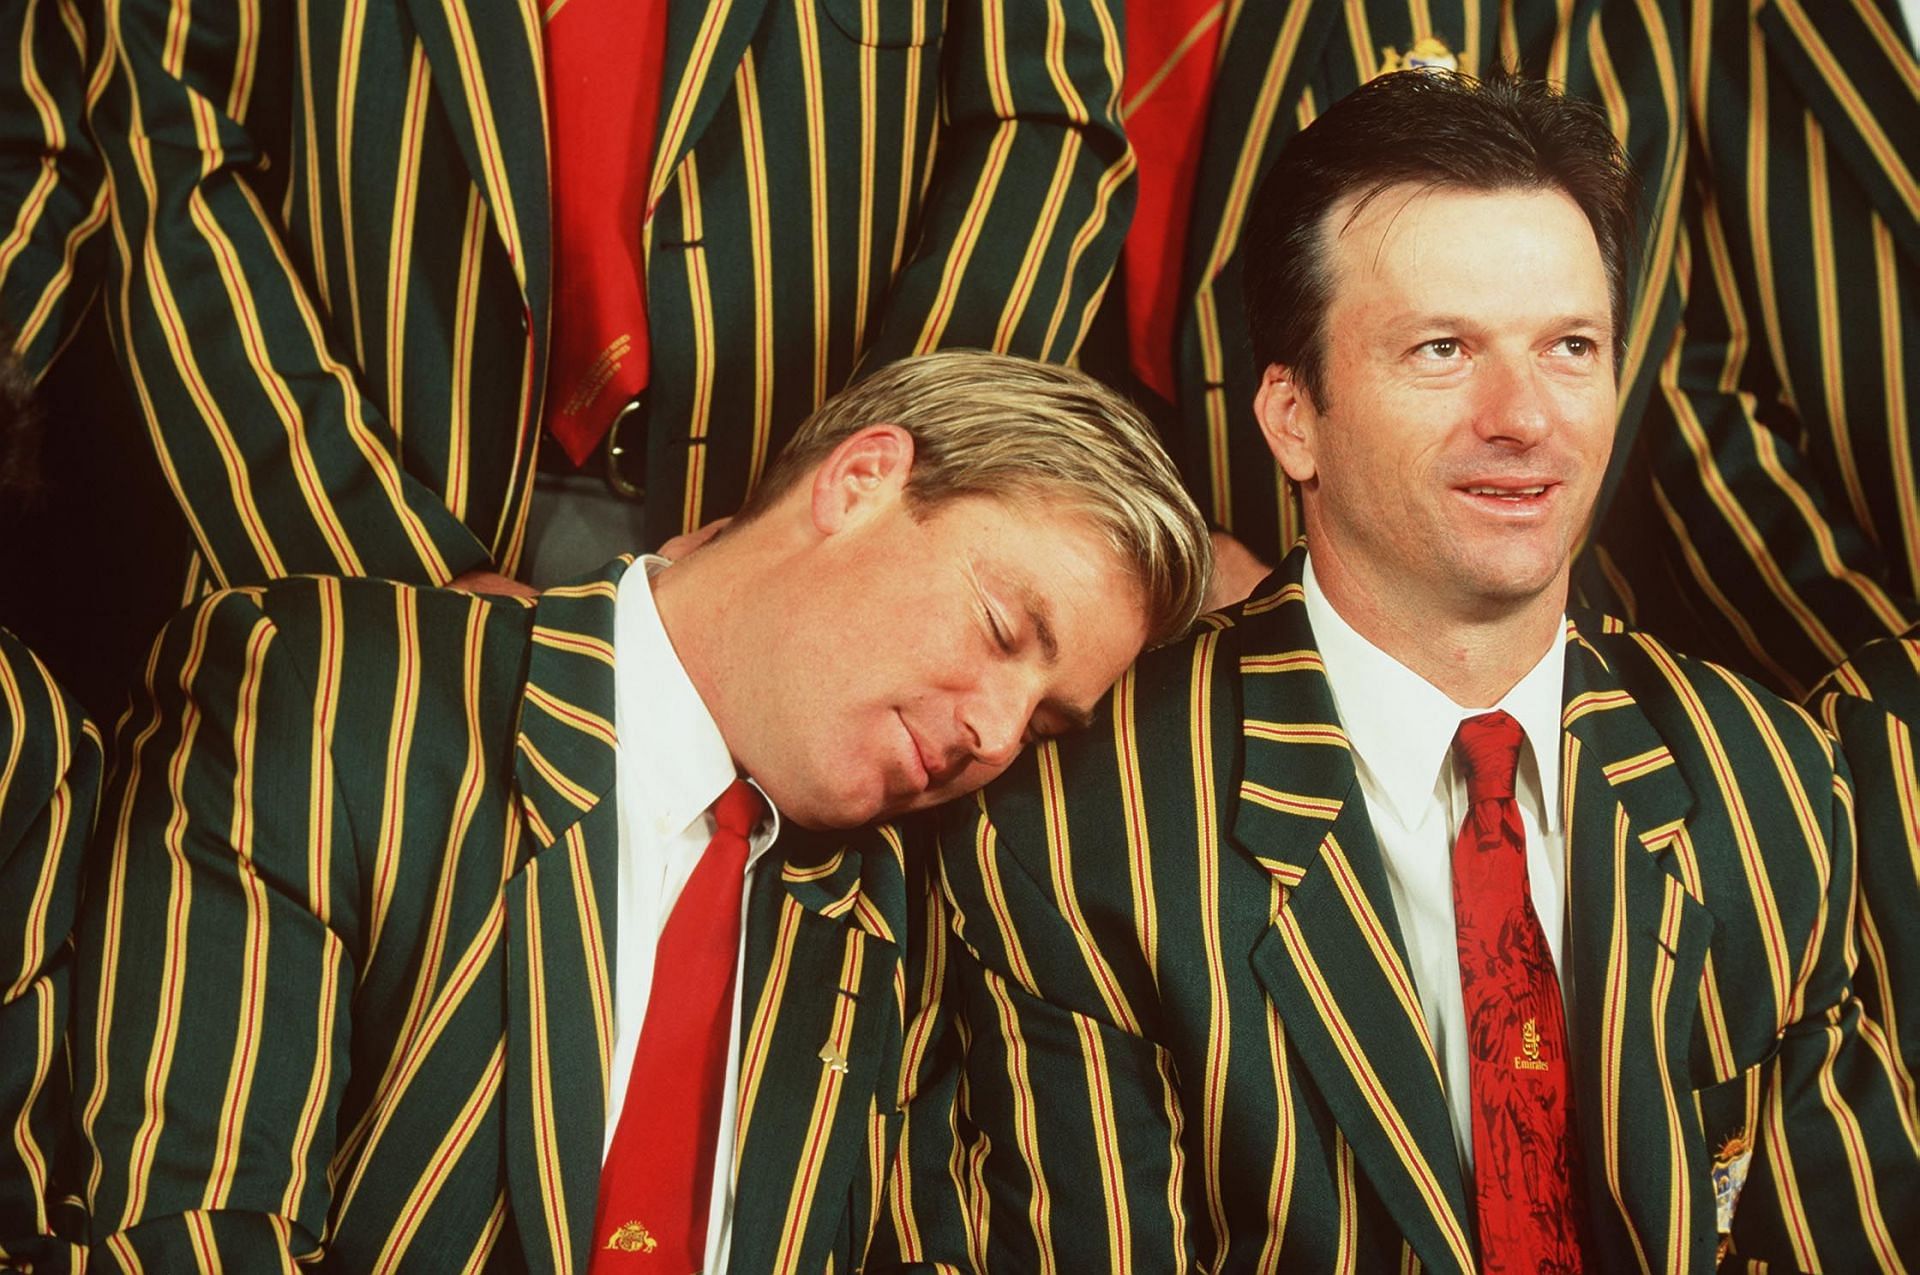 Australian cricketer Shane Warne takes a snooze on the shoulder of Steve Waugh, as the players prepare to pose for the official Australian Cricket Board World Cup team picture at the Crown Casino, Melbourne, Australia. Pic: Getty Images